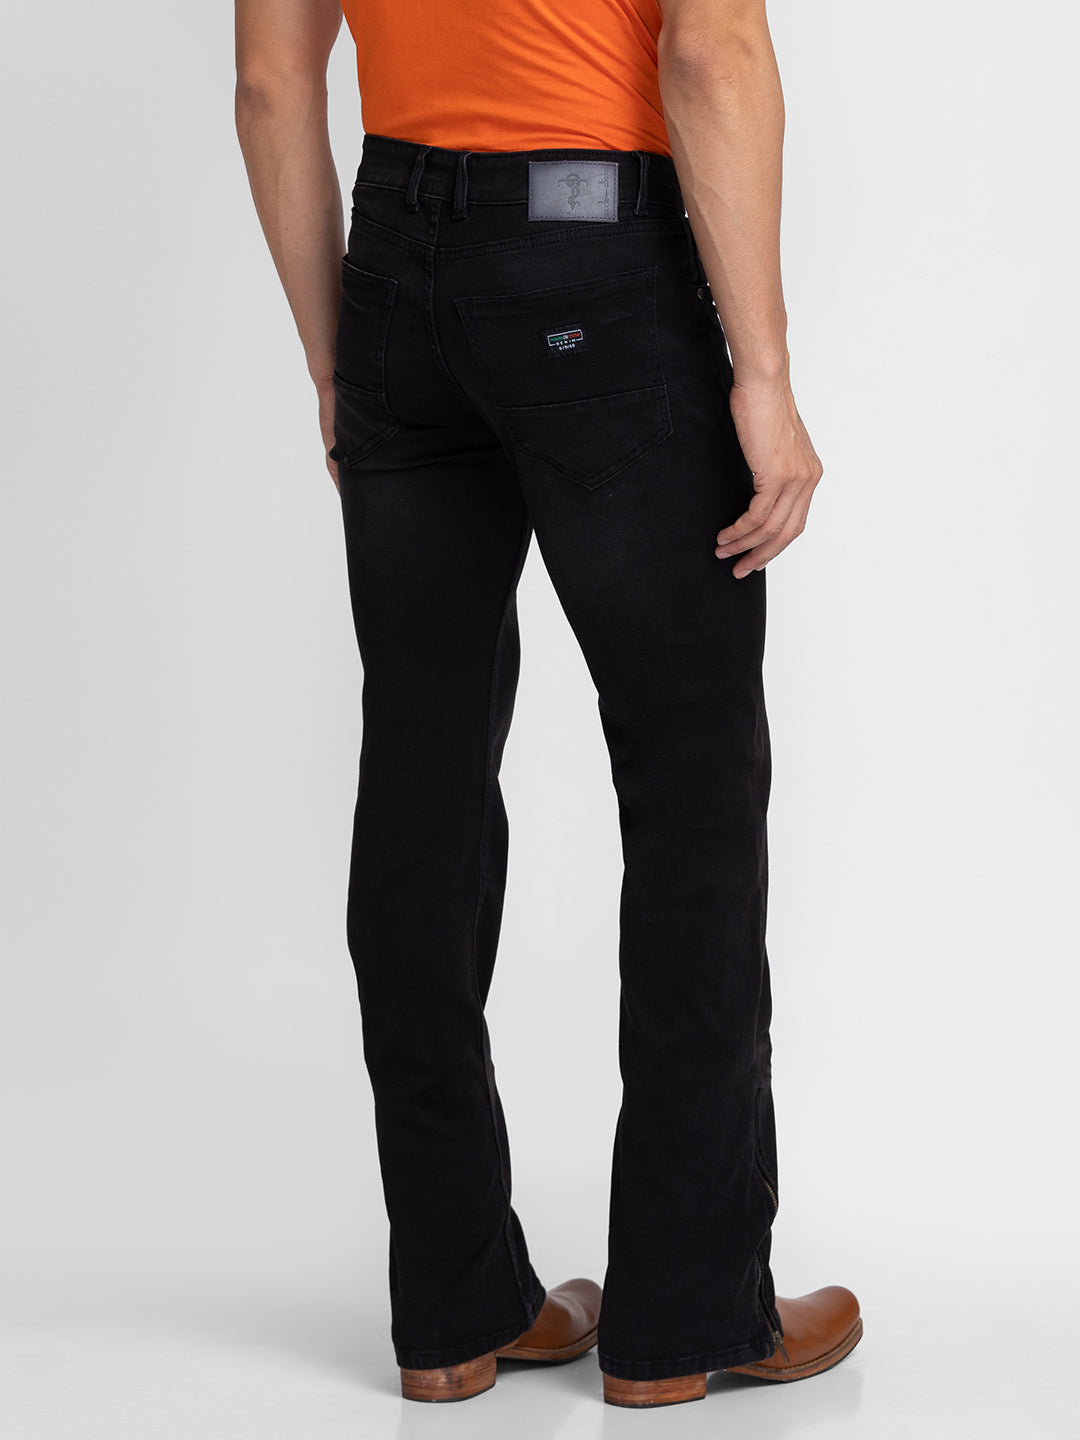 Faded Black Bootcut Jeans with Zipper Bottoms